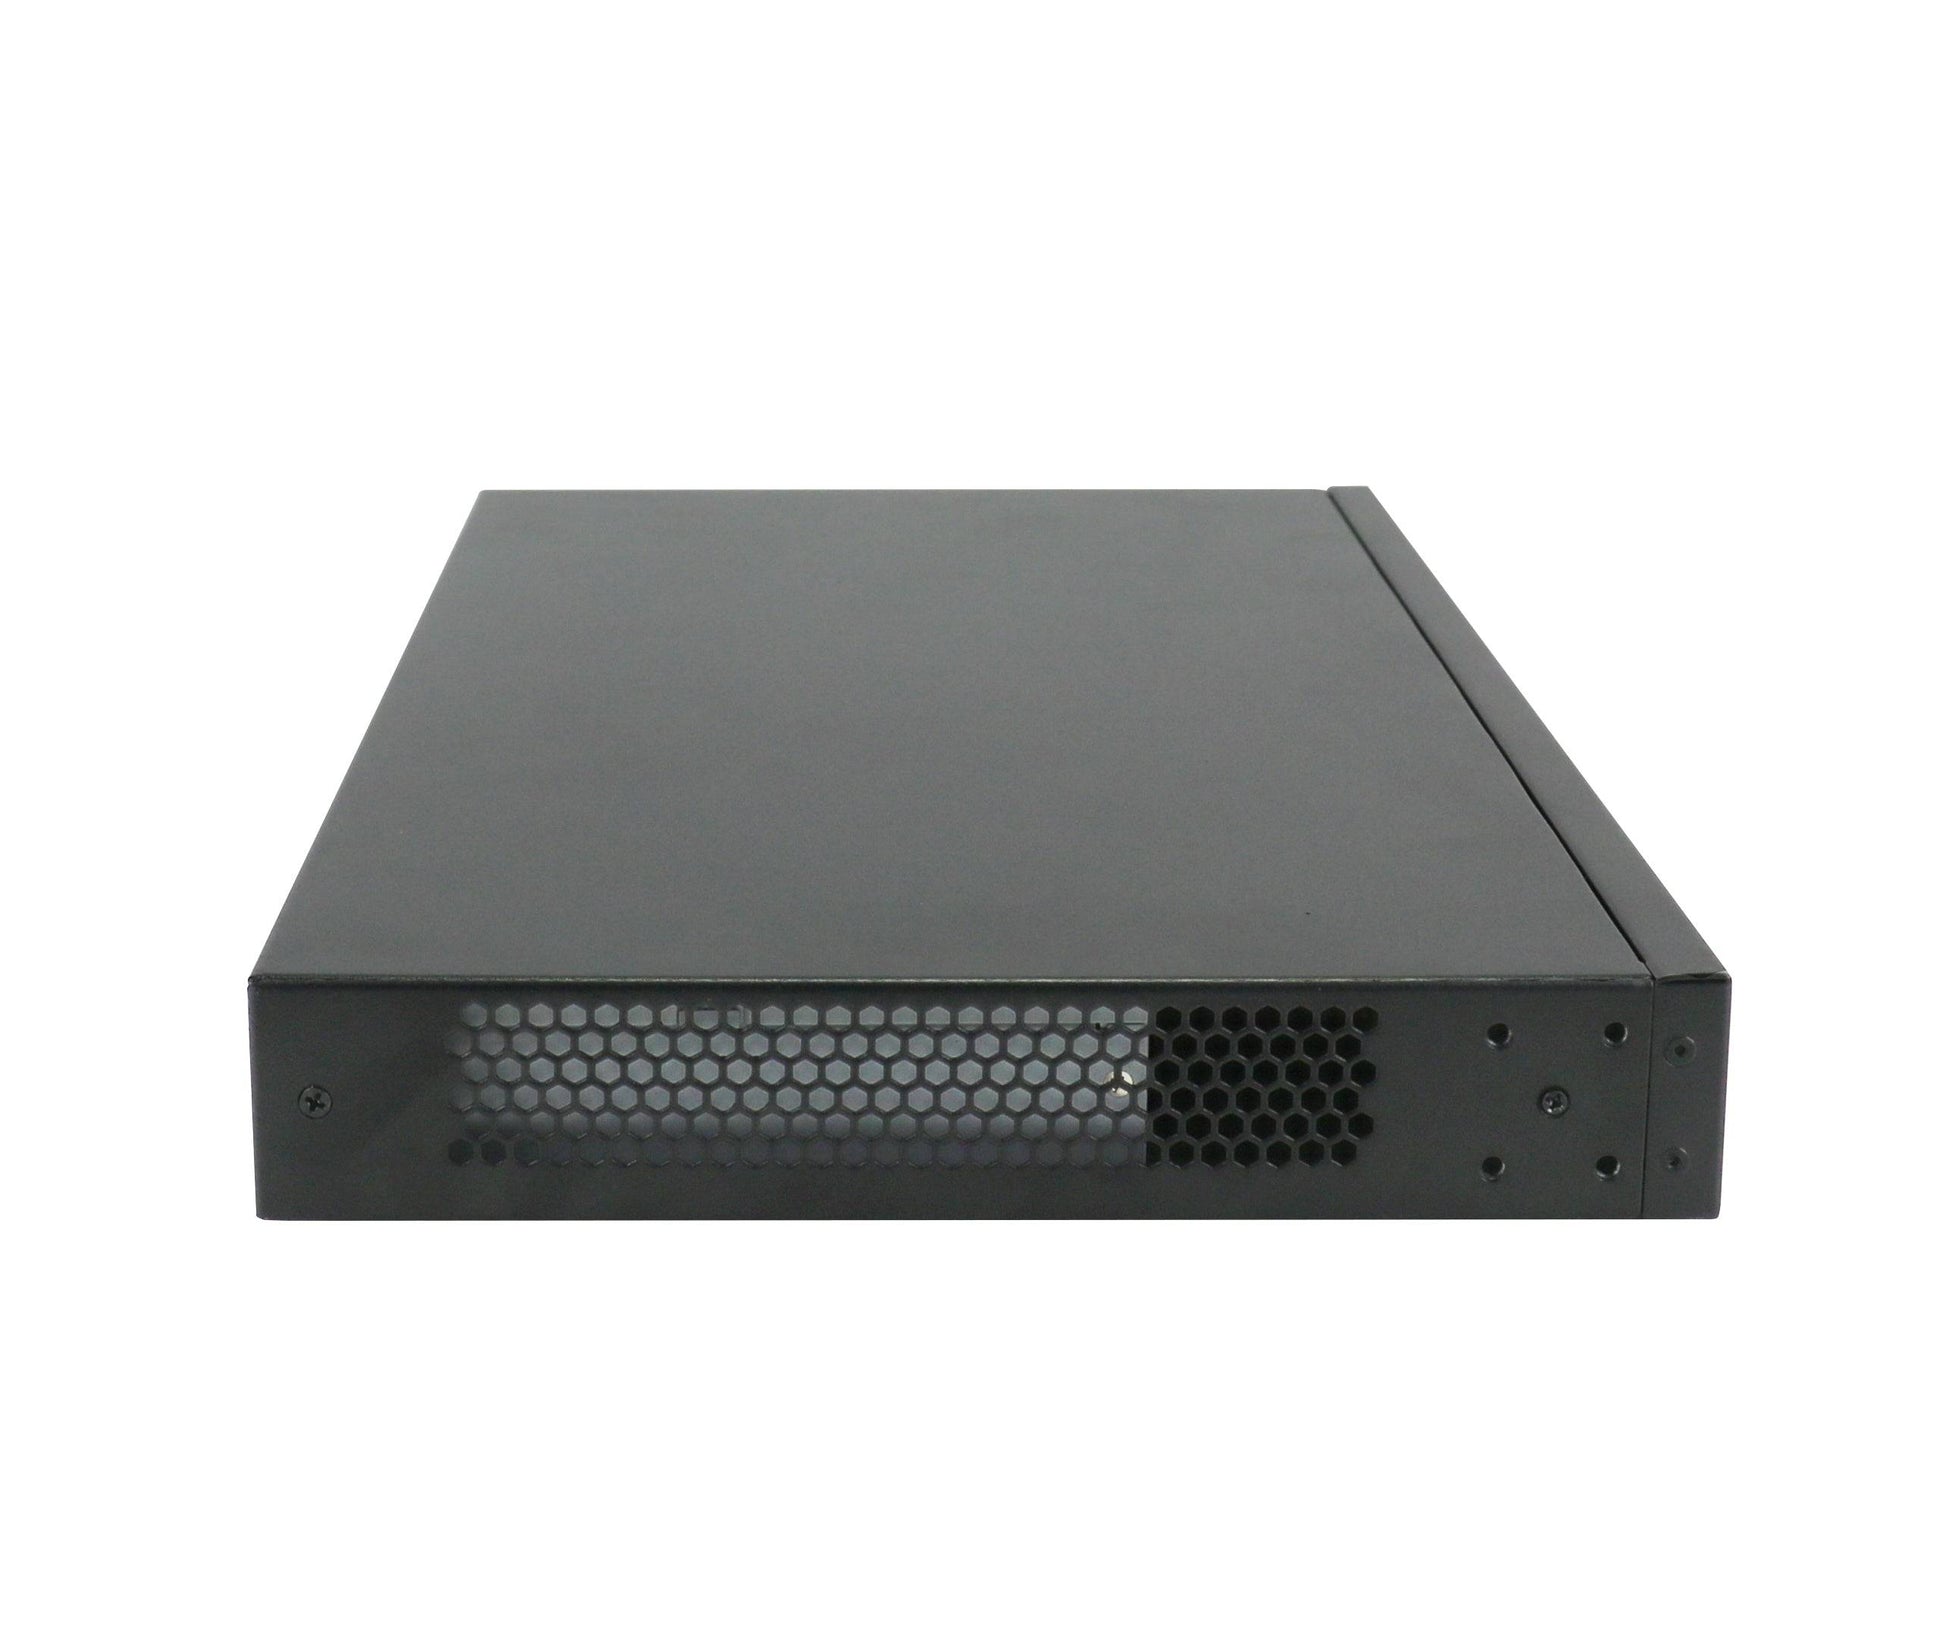 SecPoint Penetrator S9 - 64 IP Concurrent Scan License Vuln Scanning Appliance (3 Years License) - SecPoint